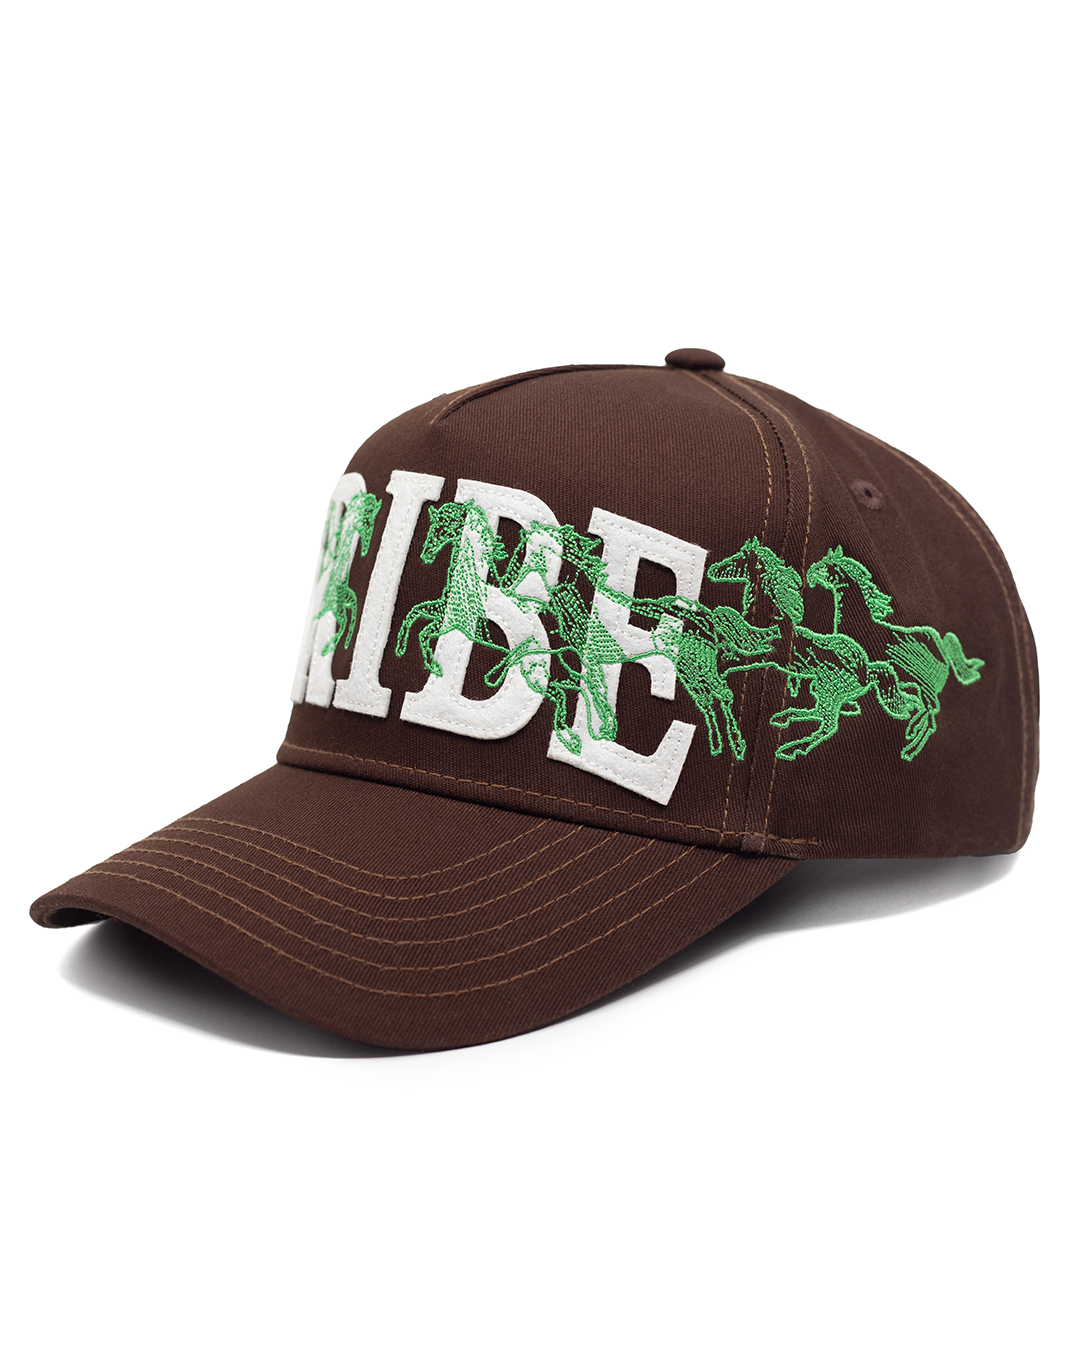 Triibe HAT OS "TRIBE" Champion Horses Hat — Chocolate lime